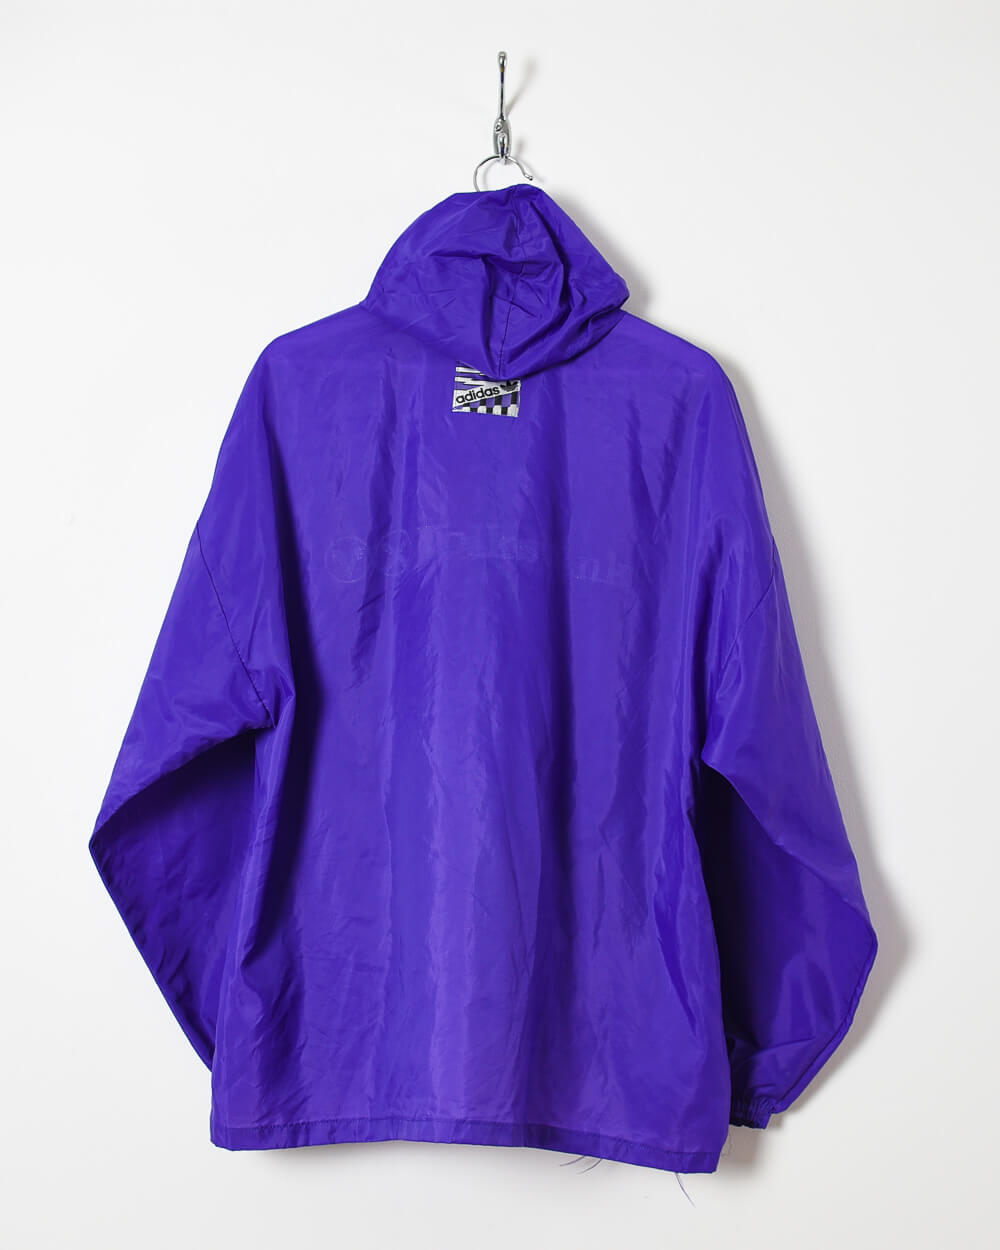 Adidas Hooded Lightweight Jacket - X-Large - Domno Vintage 90s, 80s, 00s Retro and Vintage Clothing 